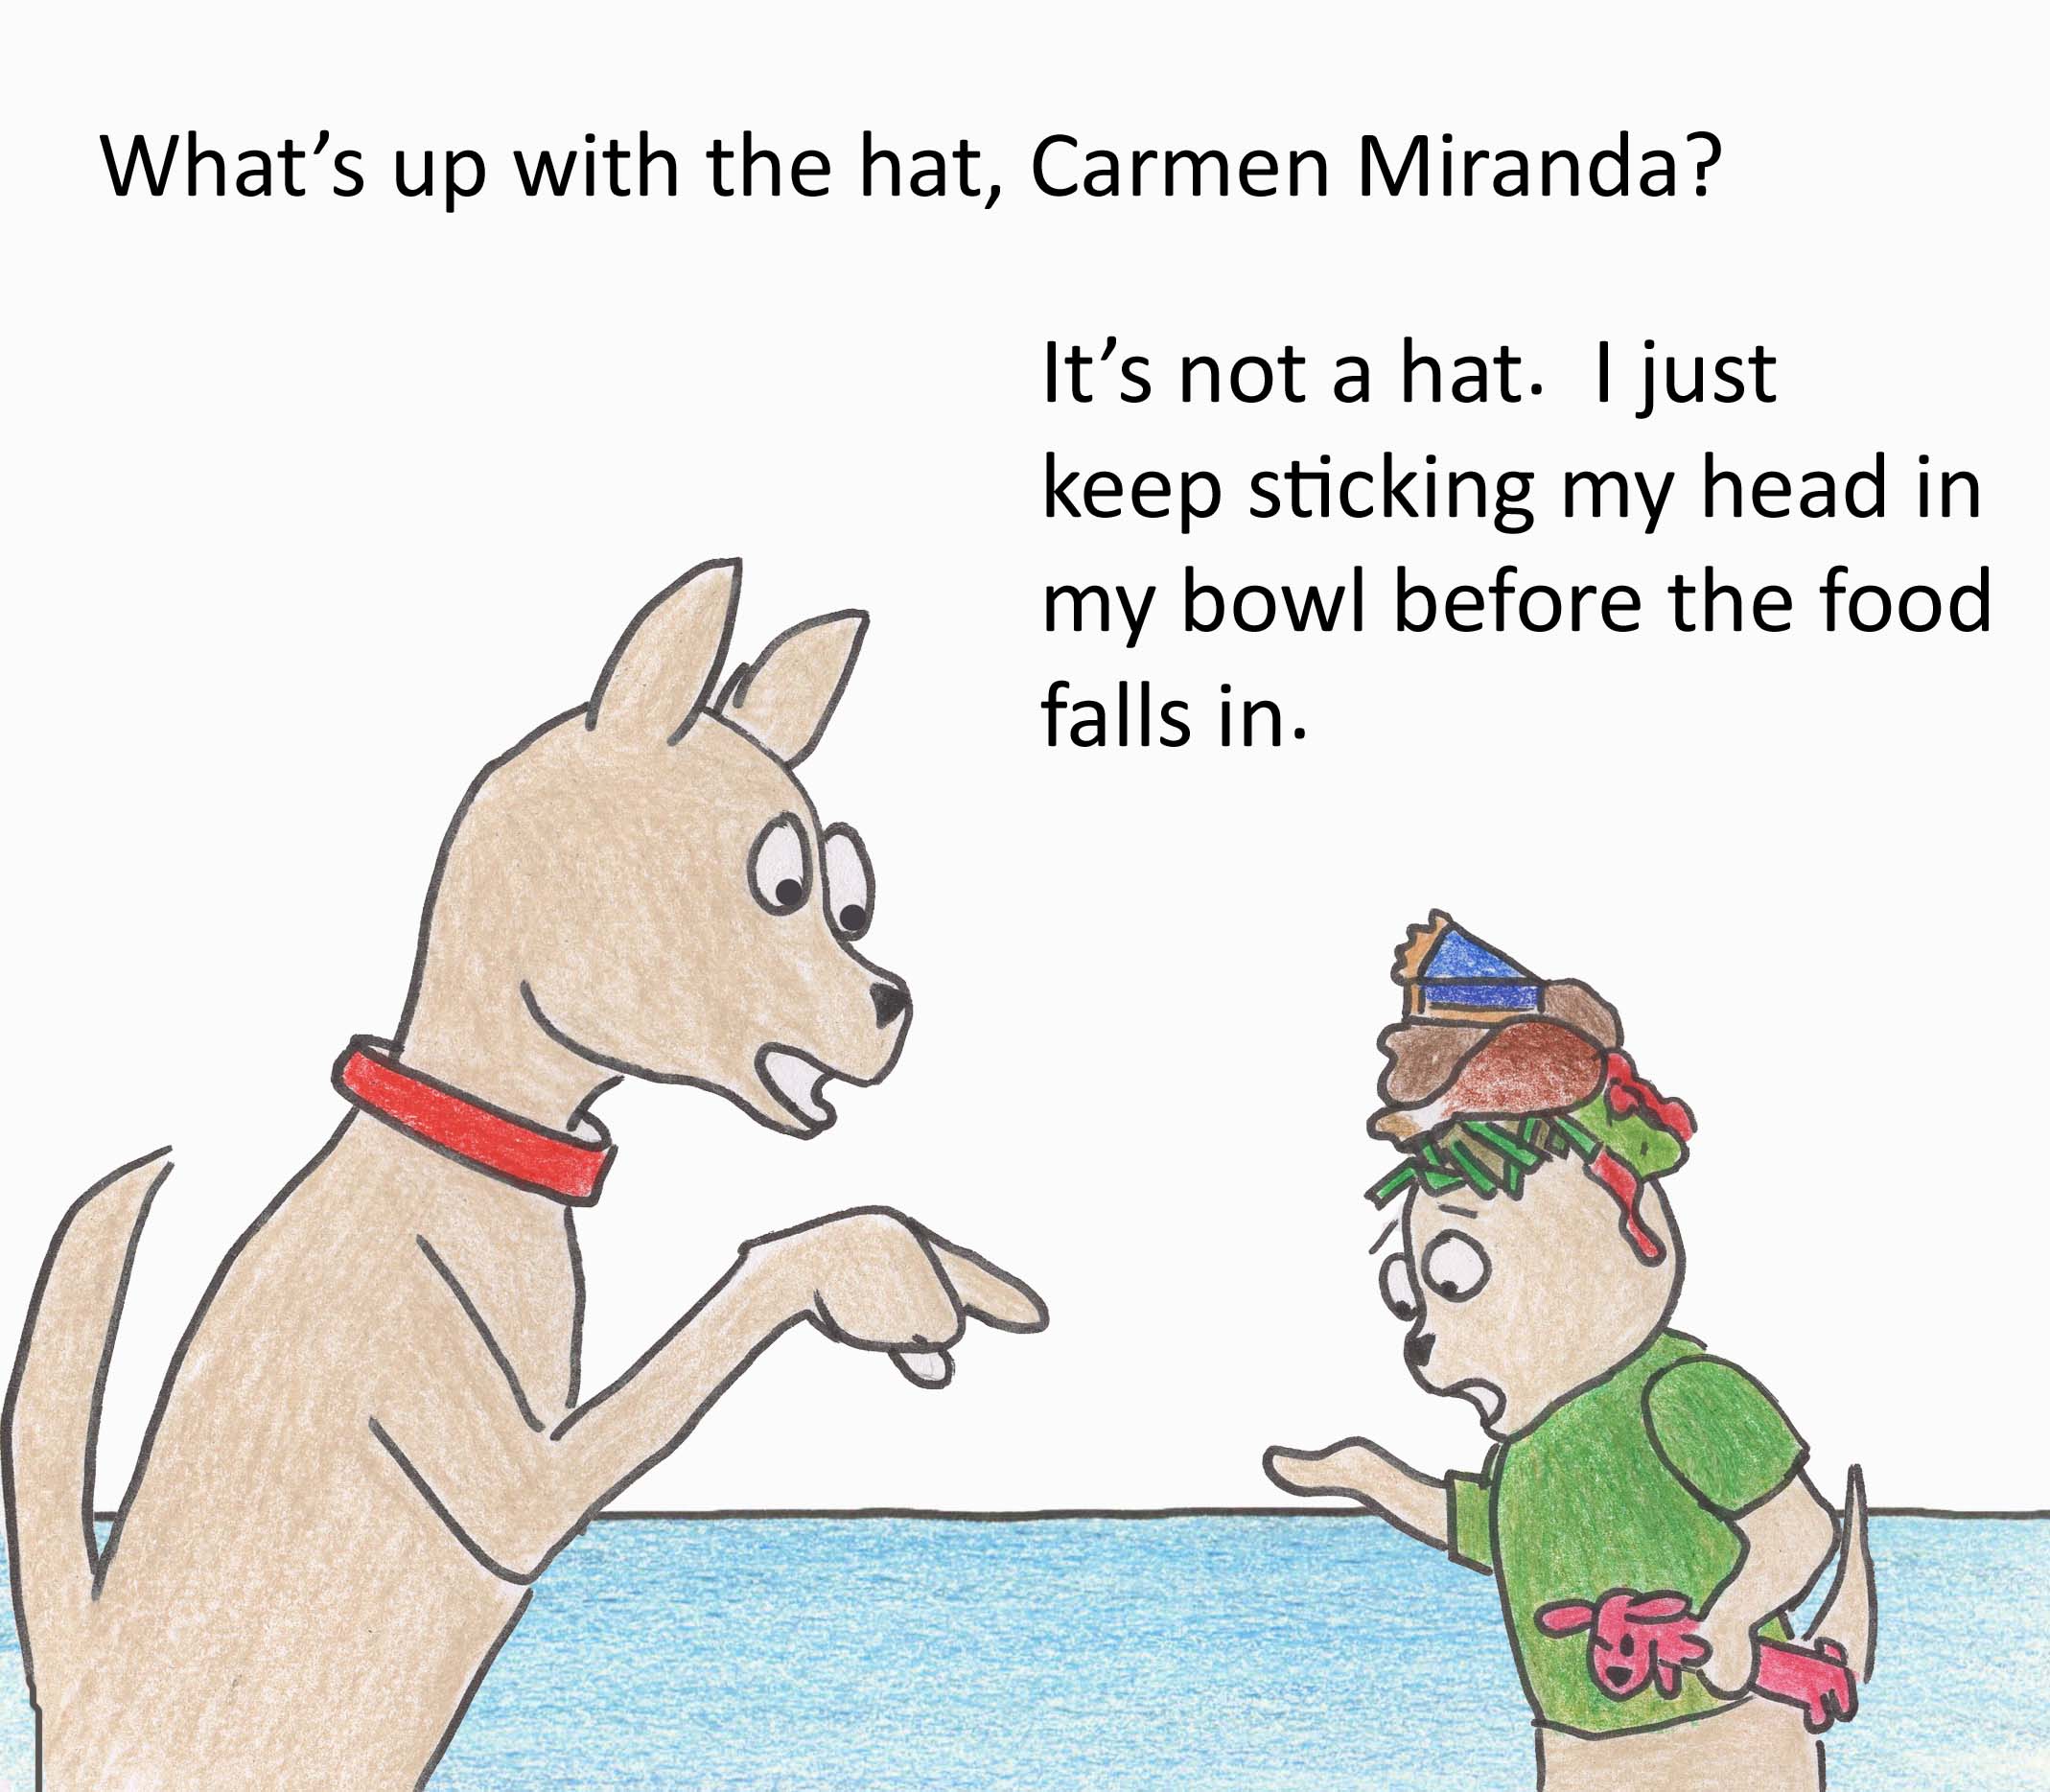 What's up with the hat, Carmen Miranda? It's not a hat. I just keep sticking my head in my bowl before the food falls in.